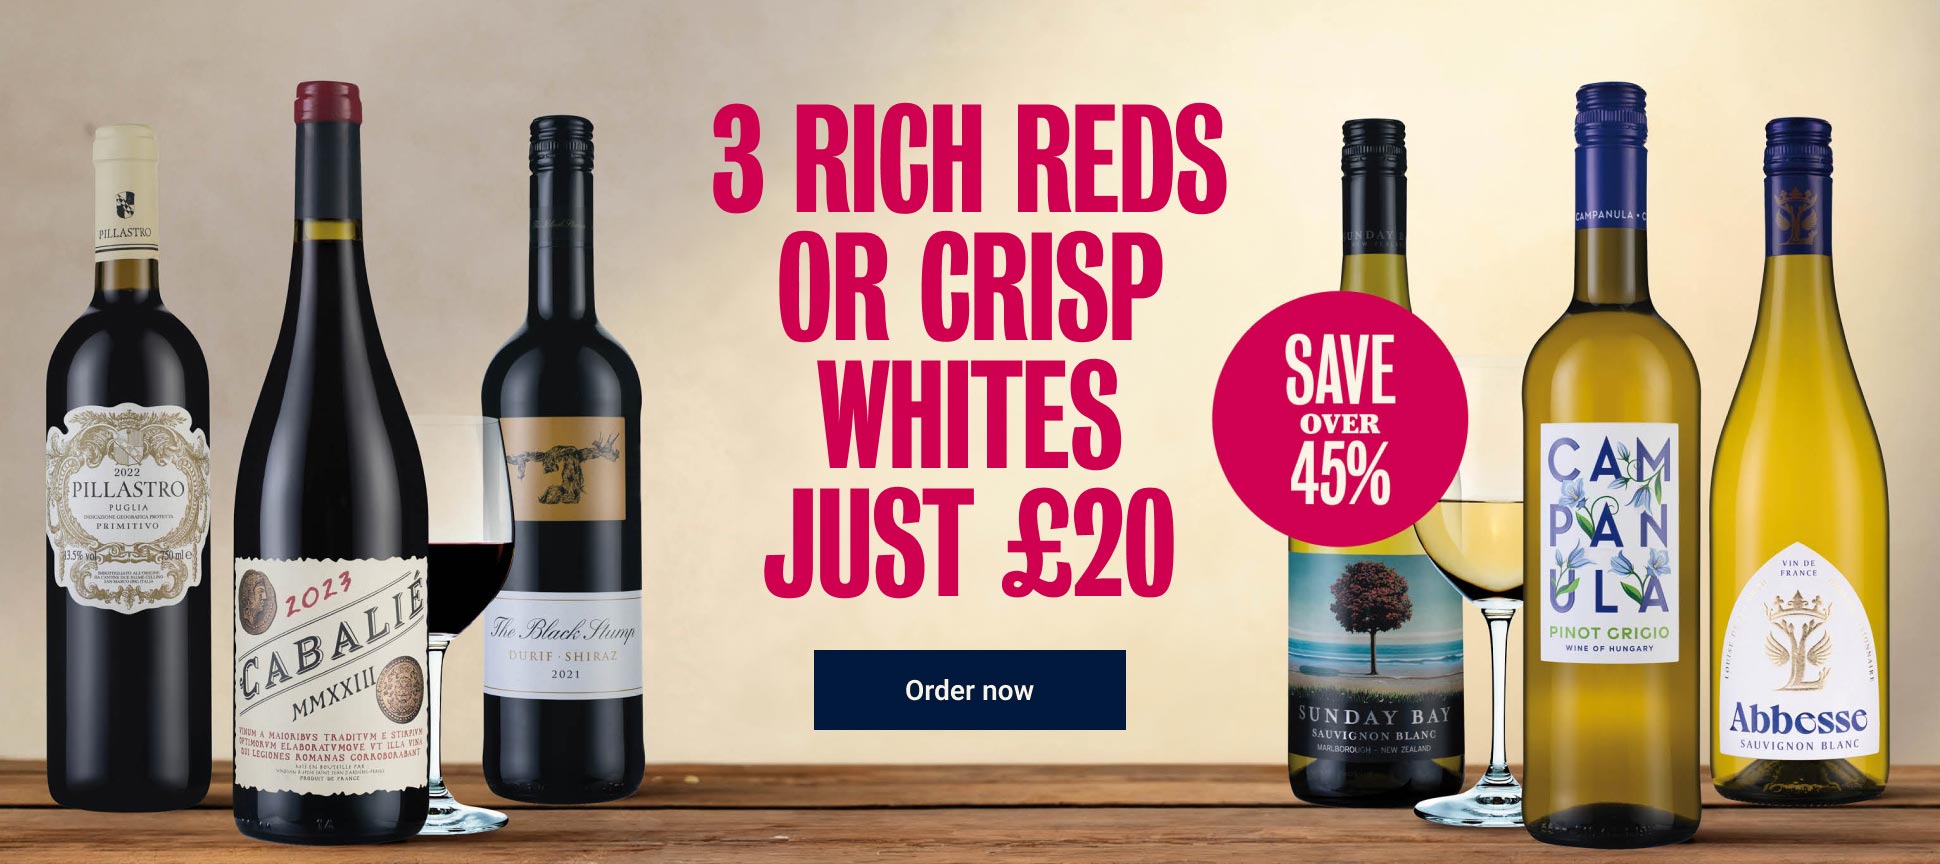 3 Rich Reds or Crisp Whites Just £20 - LW